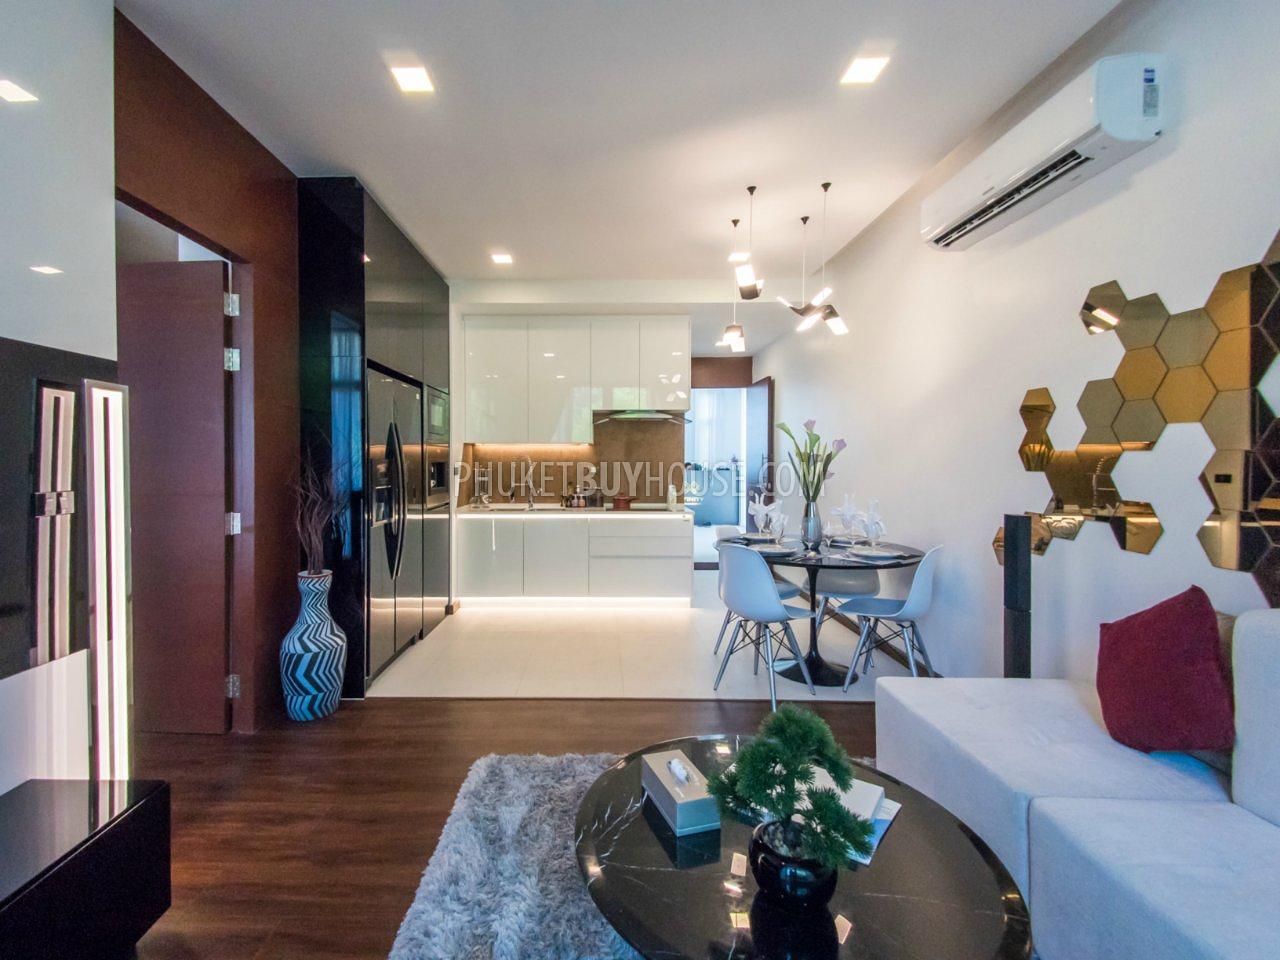 BAN5751: New project of Apartment-Studio in walking distance to Bang Tao beach. Photo #12